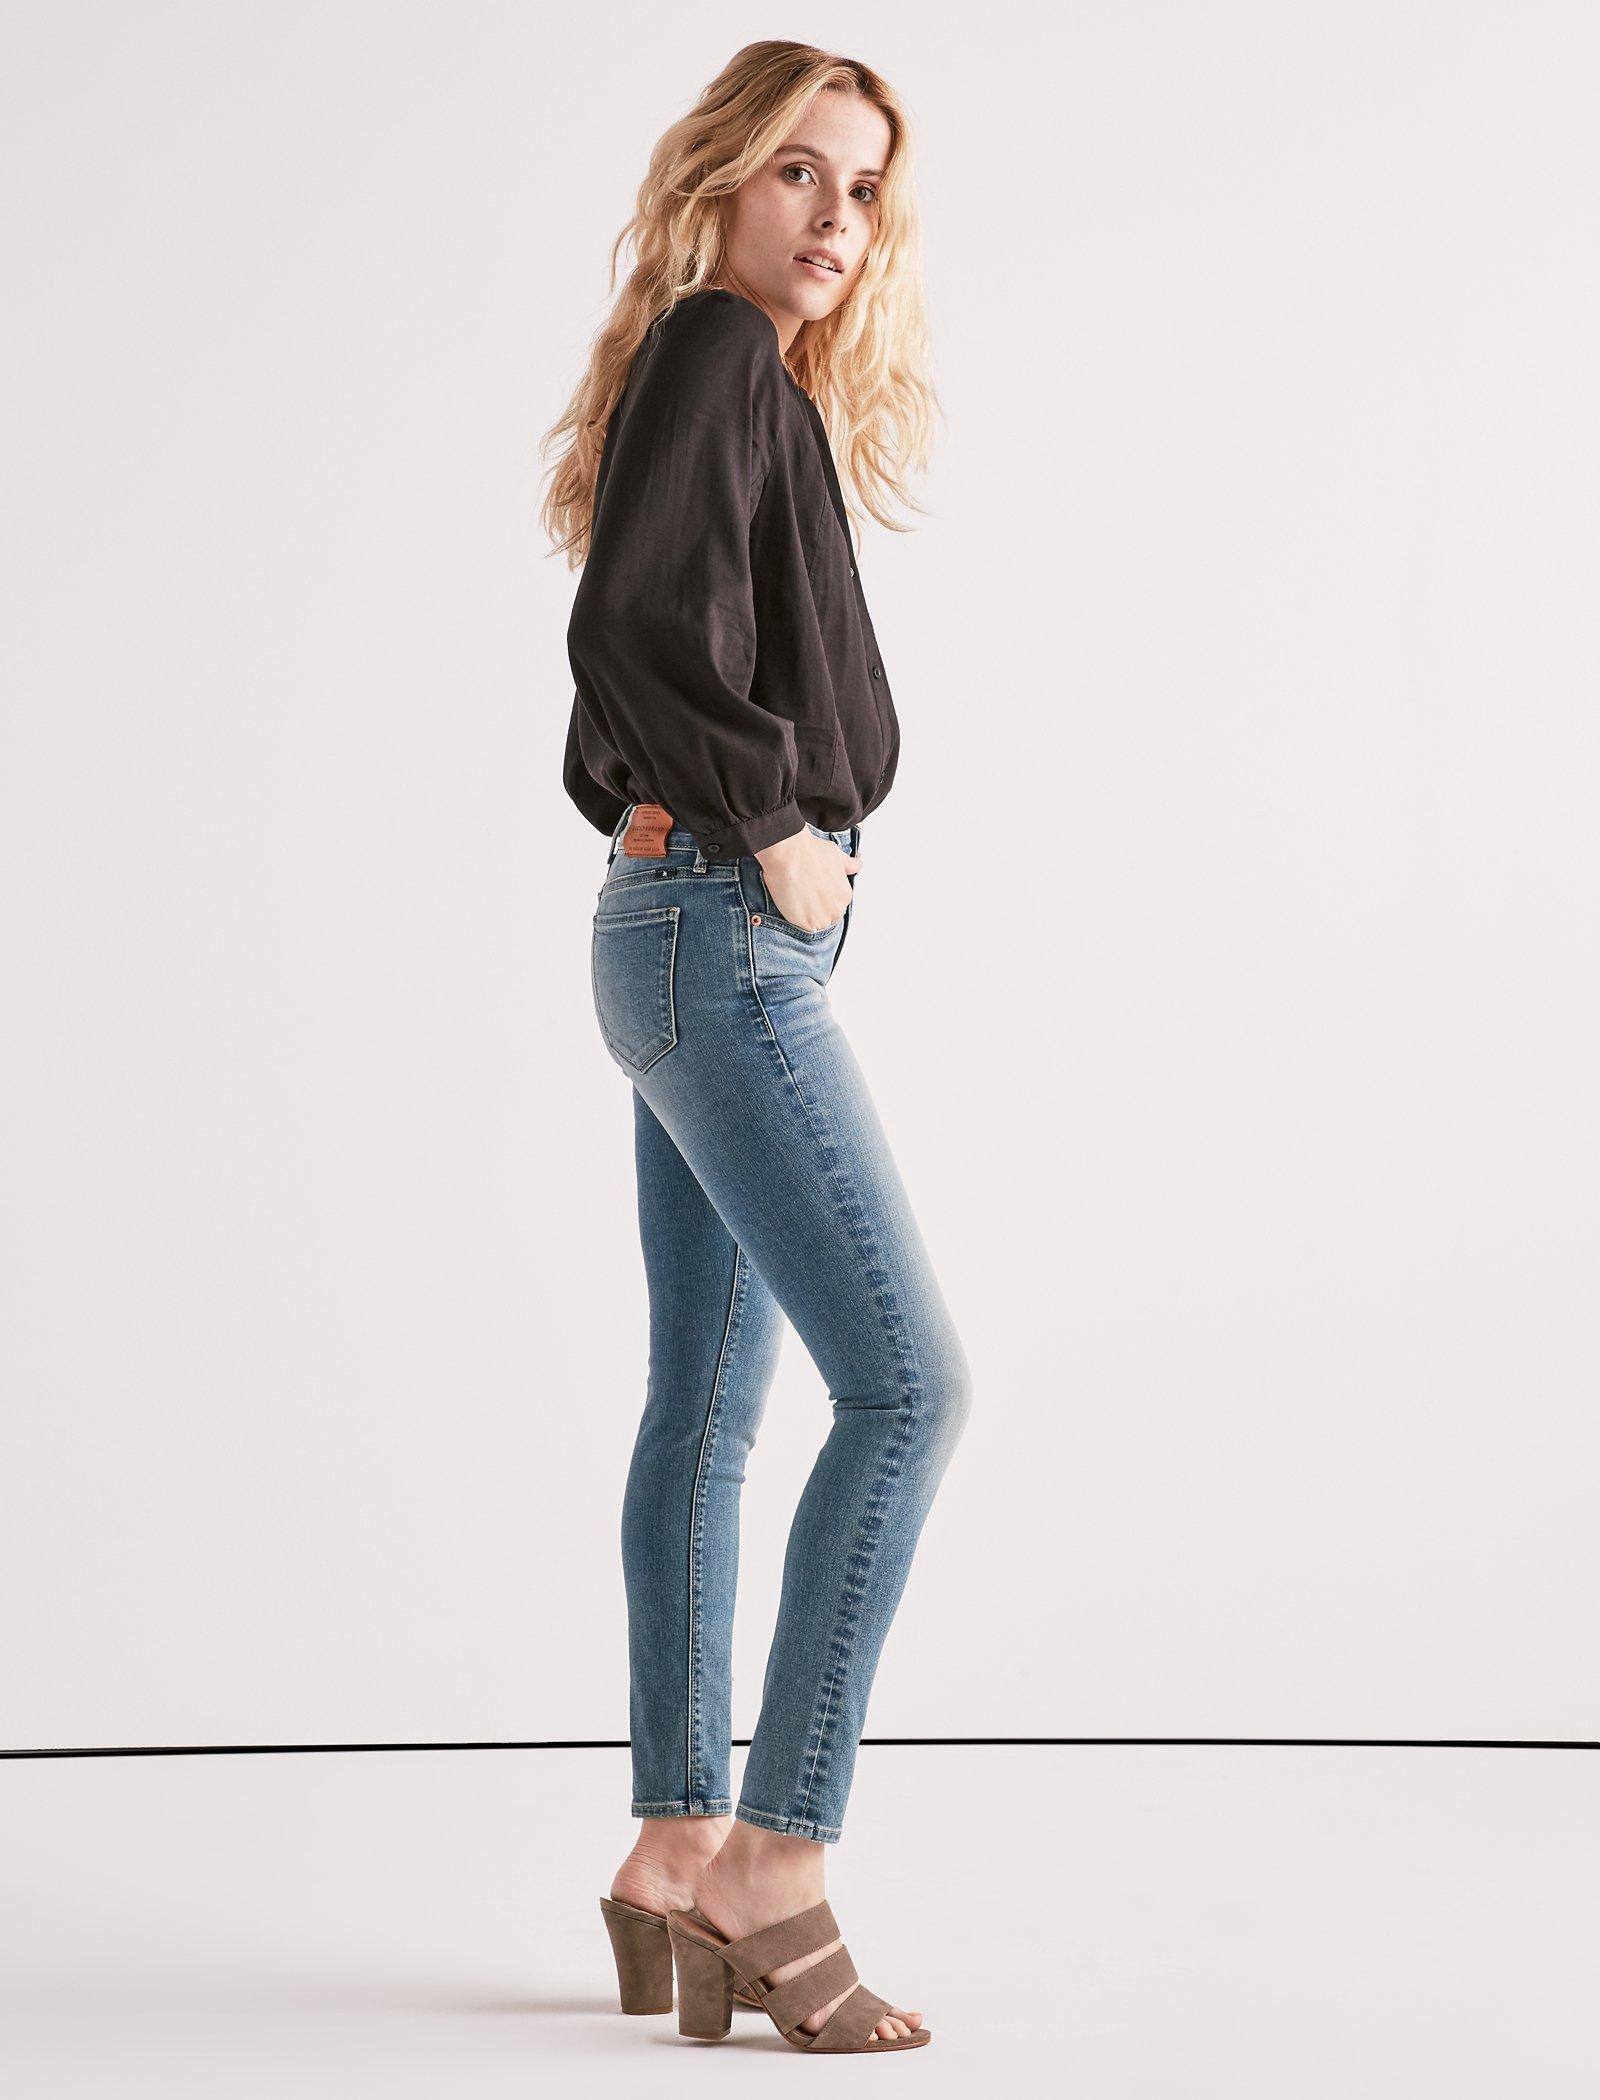 AVA MID RISE SKINNY JEAN IN ROCKY RIVER | Lucky Brand